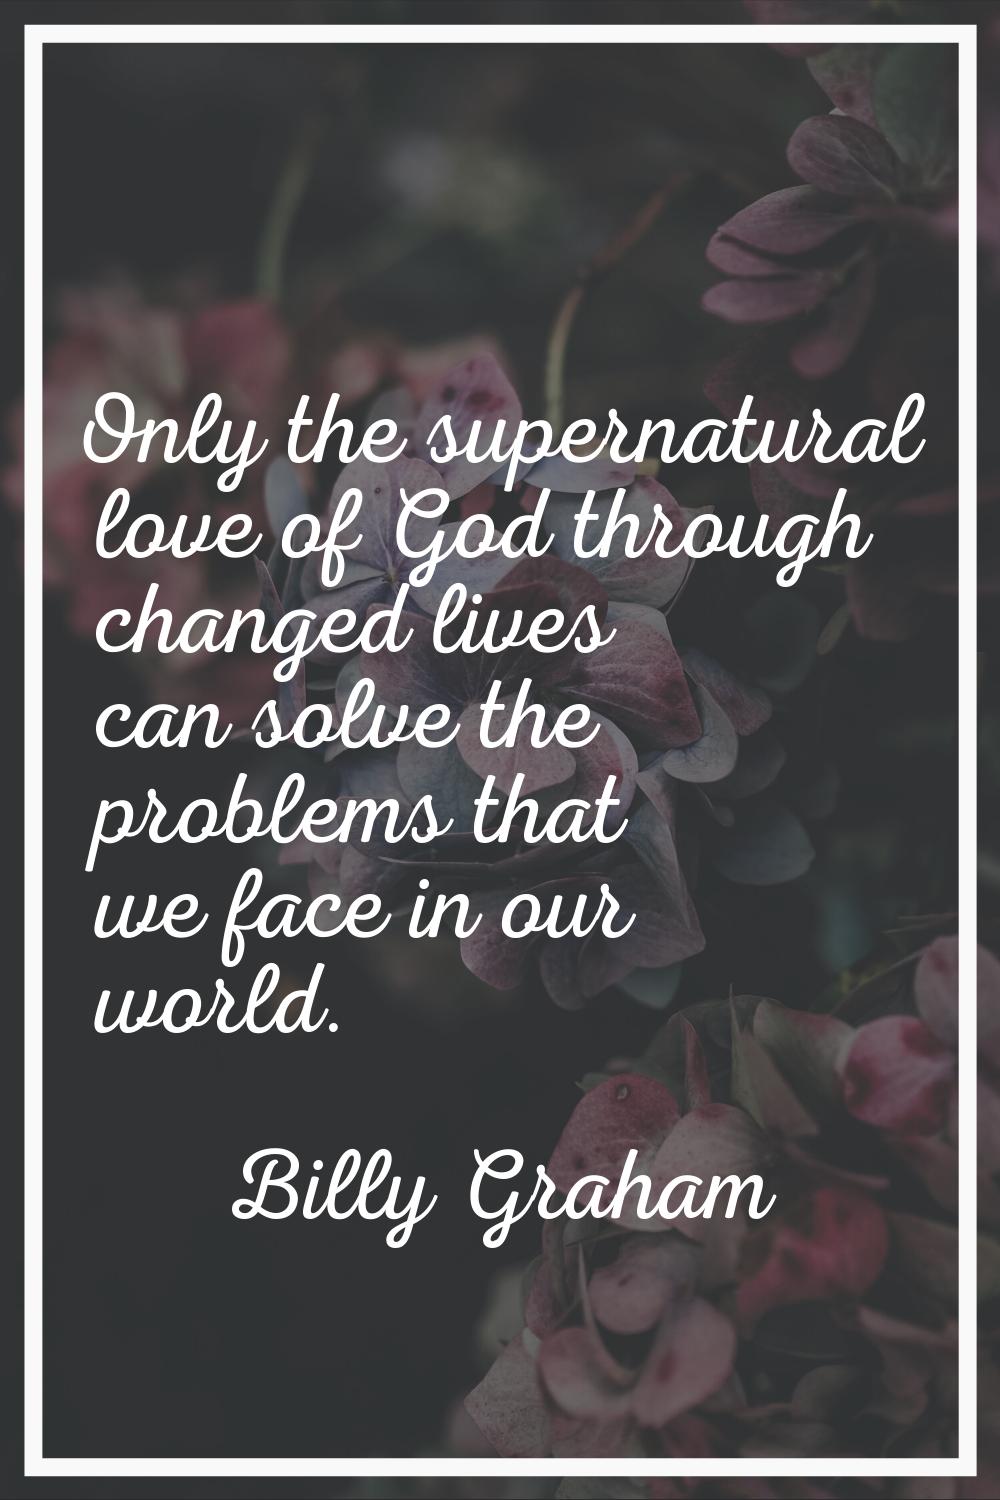 Only the supernatural love of God through changed lives can solve the problems that we face in our 